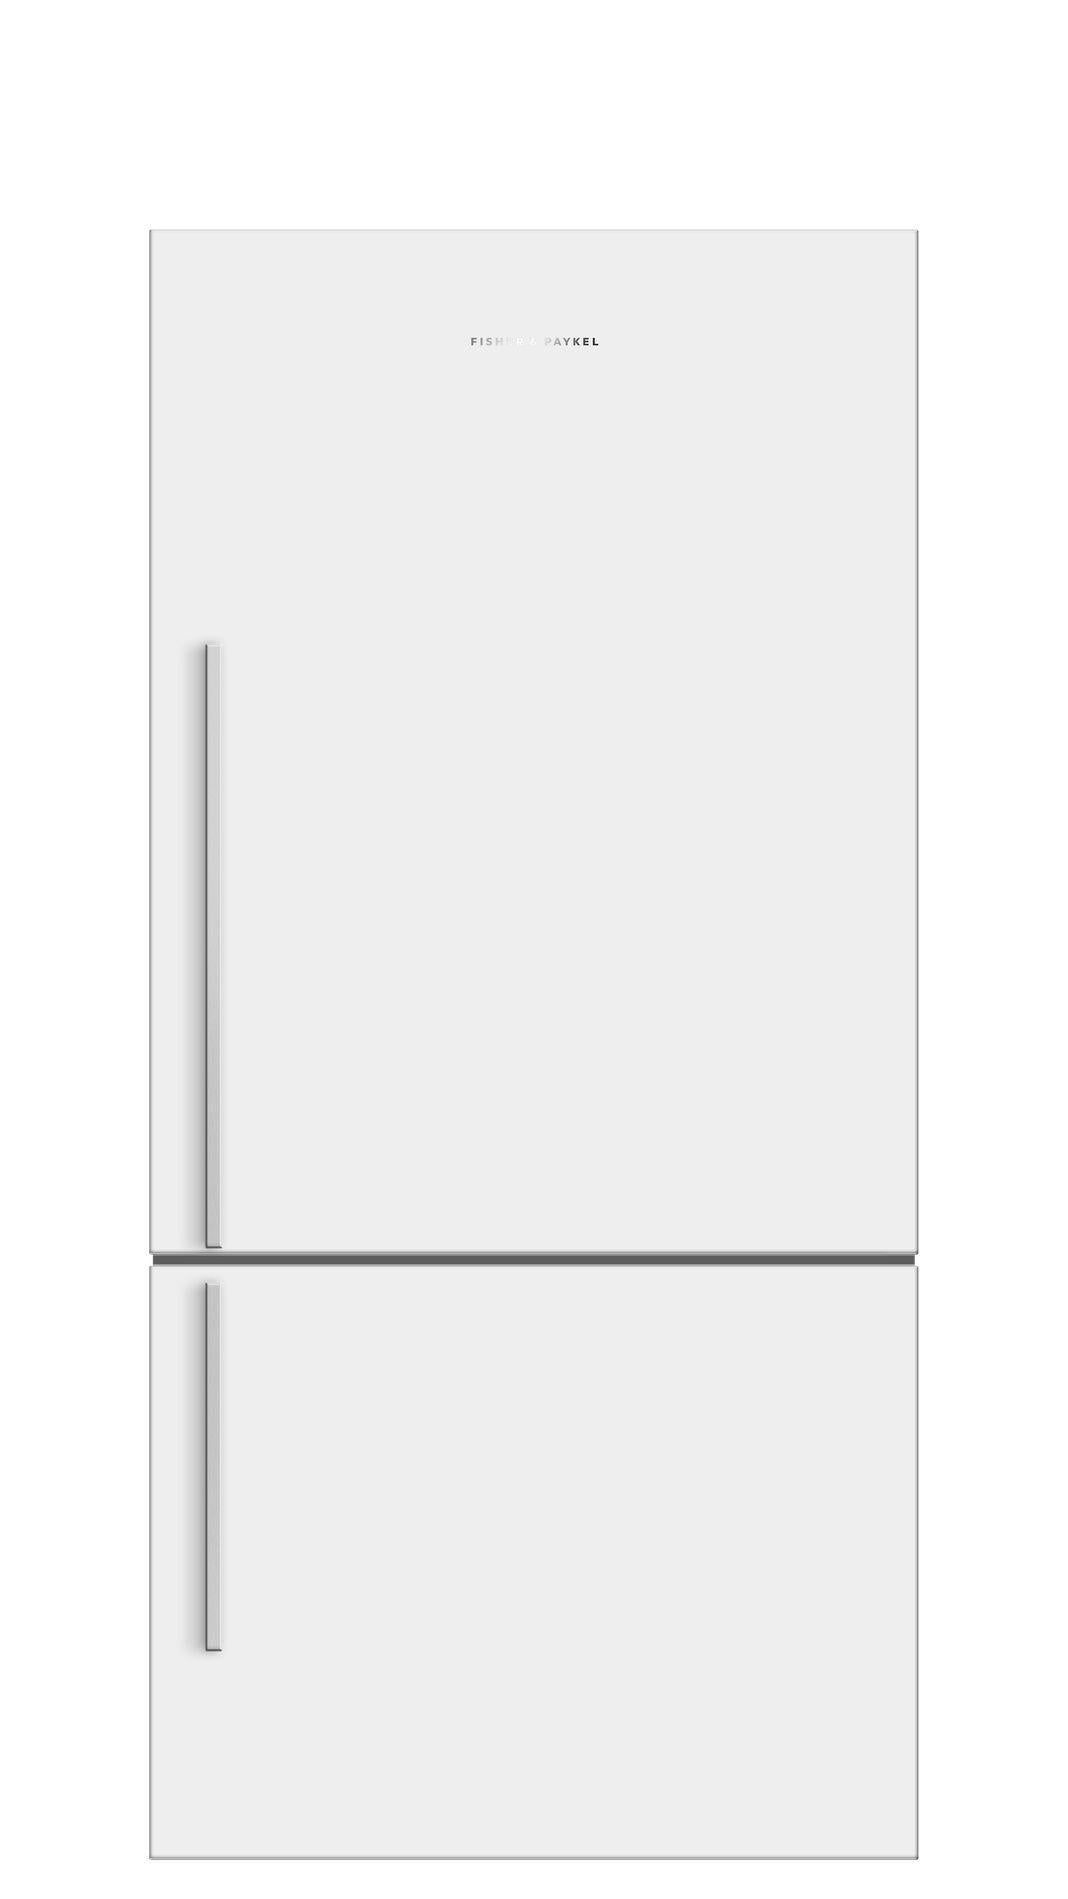 Fisher Paykel - 31.125 Inch 17.5 cu. ft Bottom Mount Refrigerator in White - E522BRWFD5 N